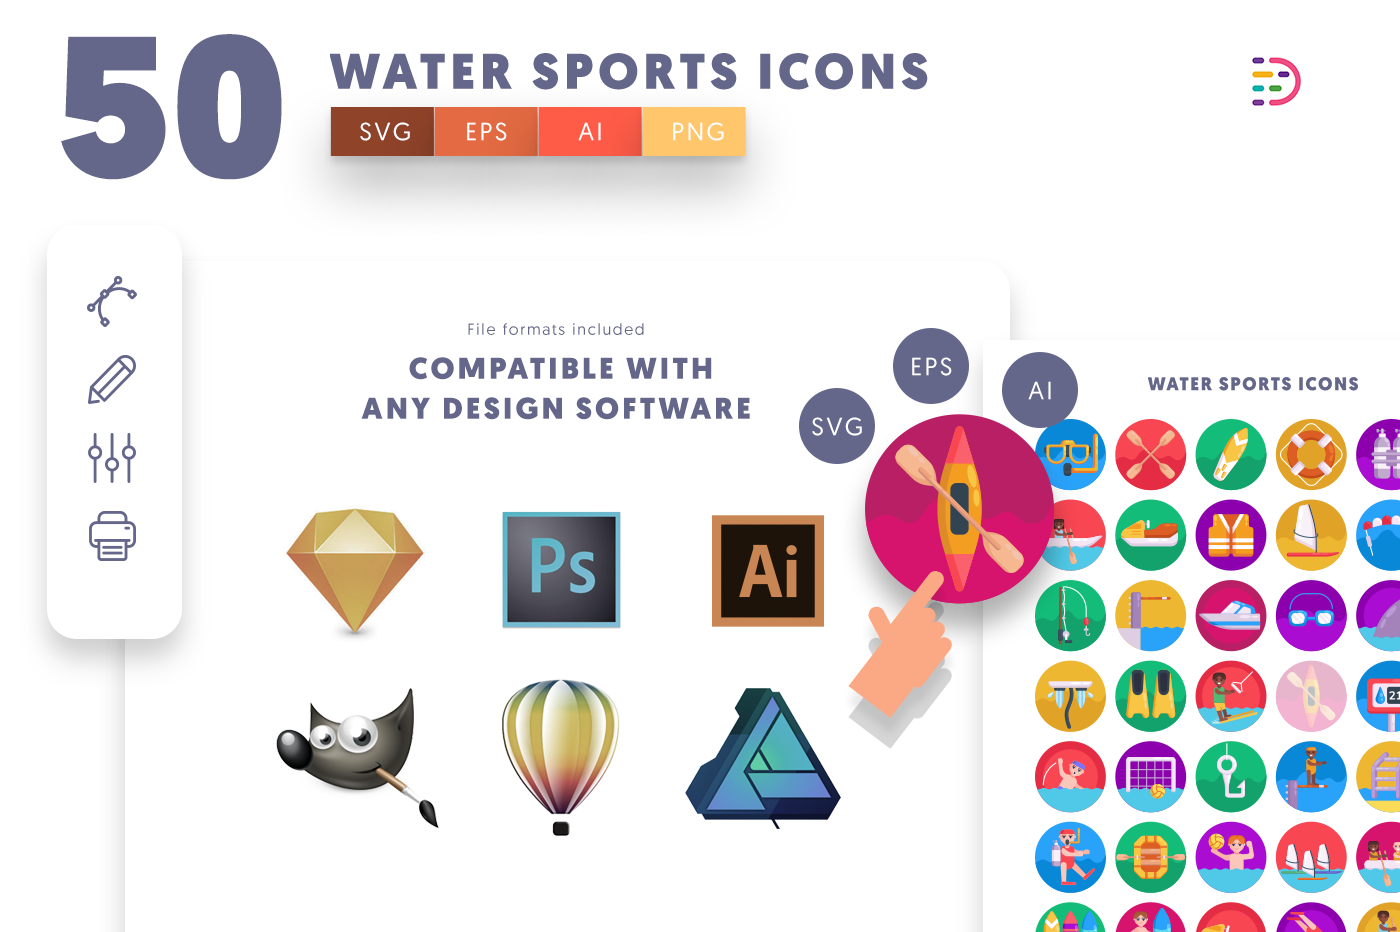  full vector 50 Water Sports Icons EPS, SVG, PNG